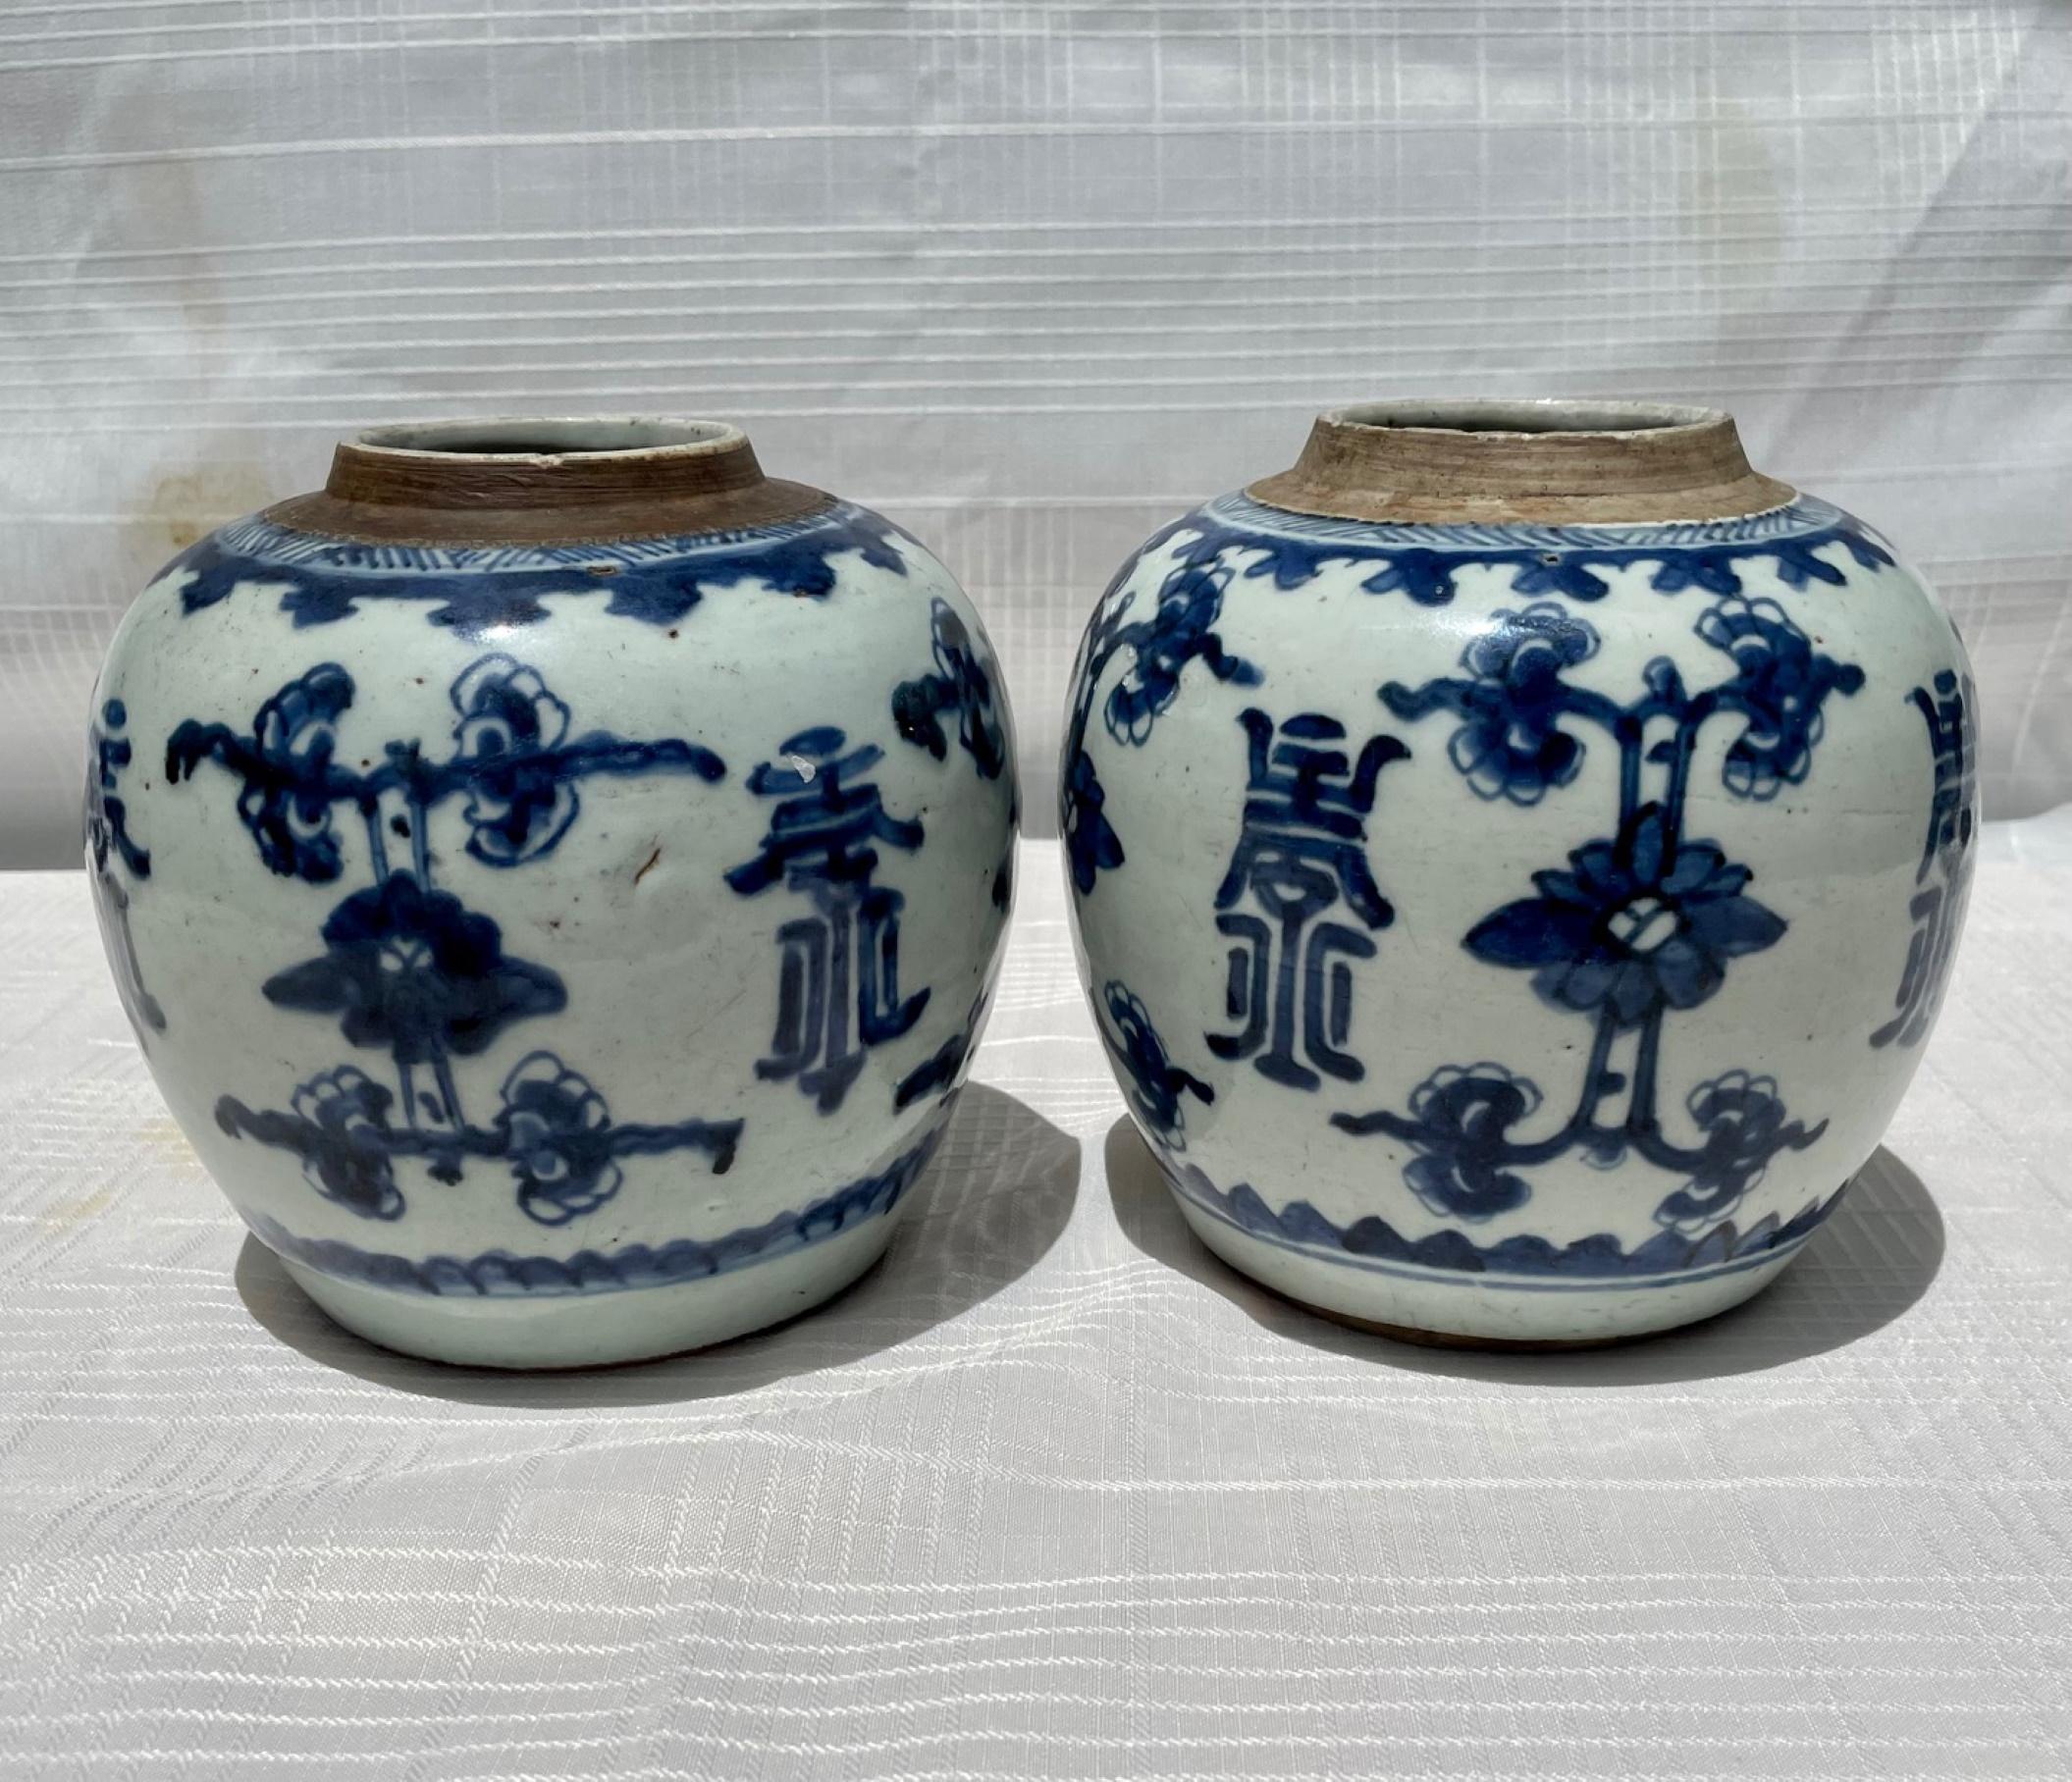 Pair of Chinese Qing Kangxi blue & white shou ginger jars, 18th century

Chinese Kangxi period pair of ginger jars decorated in underglaze blue on off-white porcelain ground. Decorated with 4 shou (longevity) characters alternating with stylized